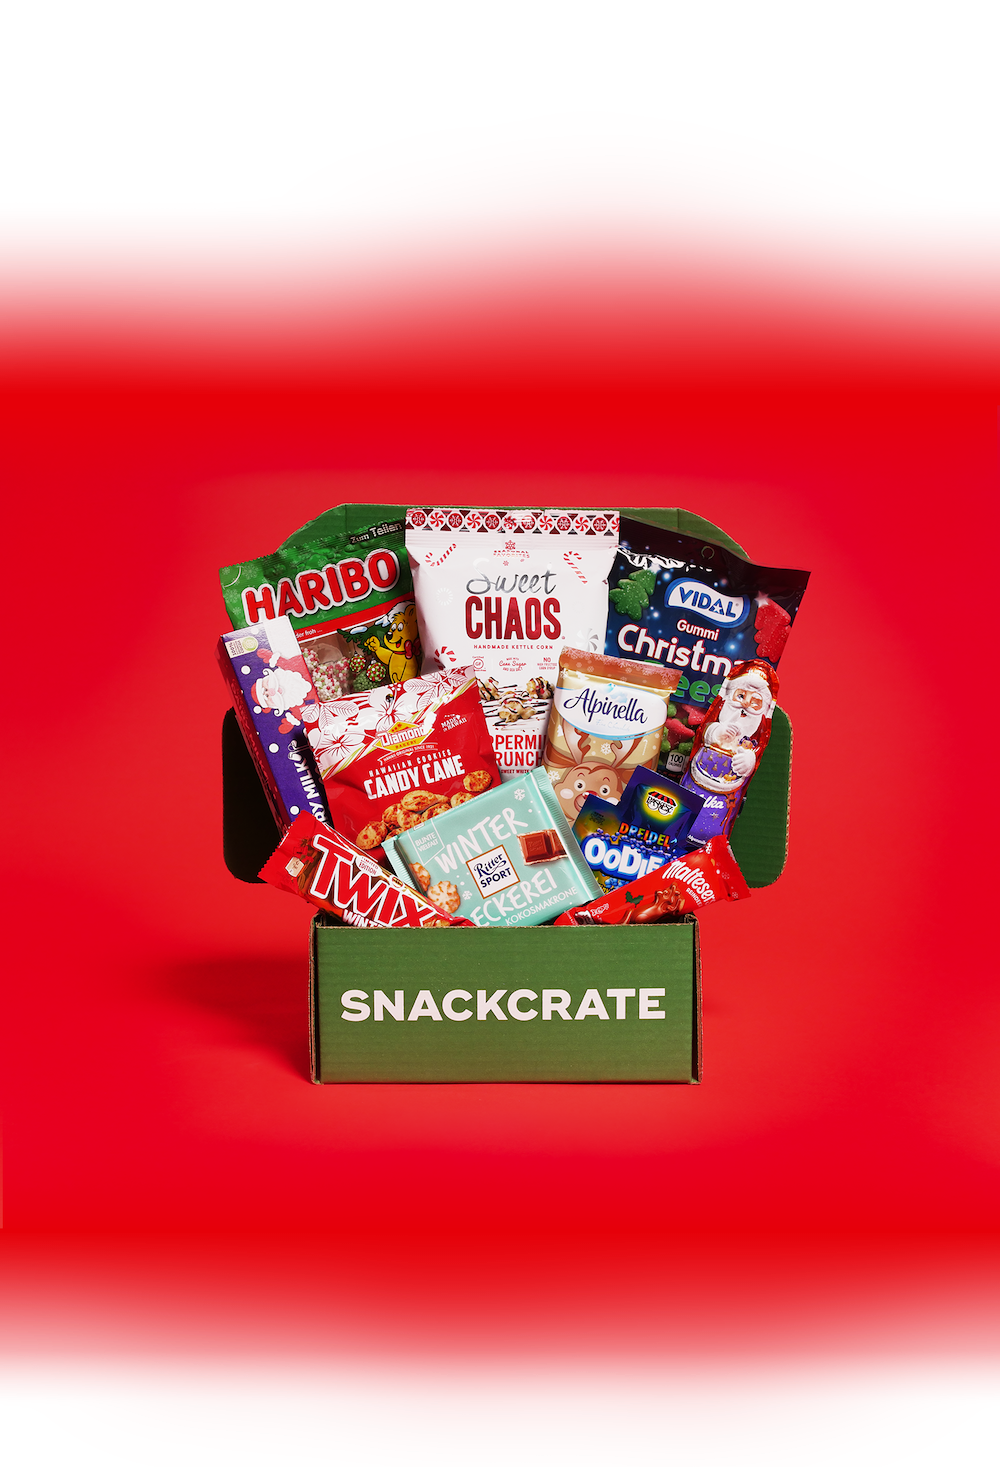 Holiday snackcrate full of foreign snacks